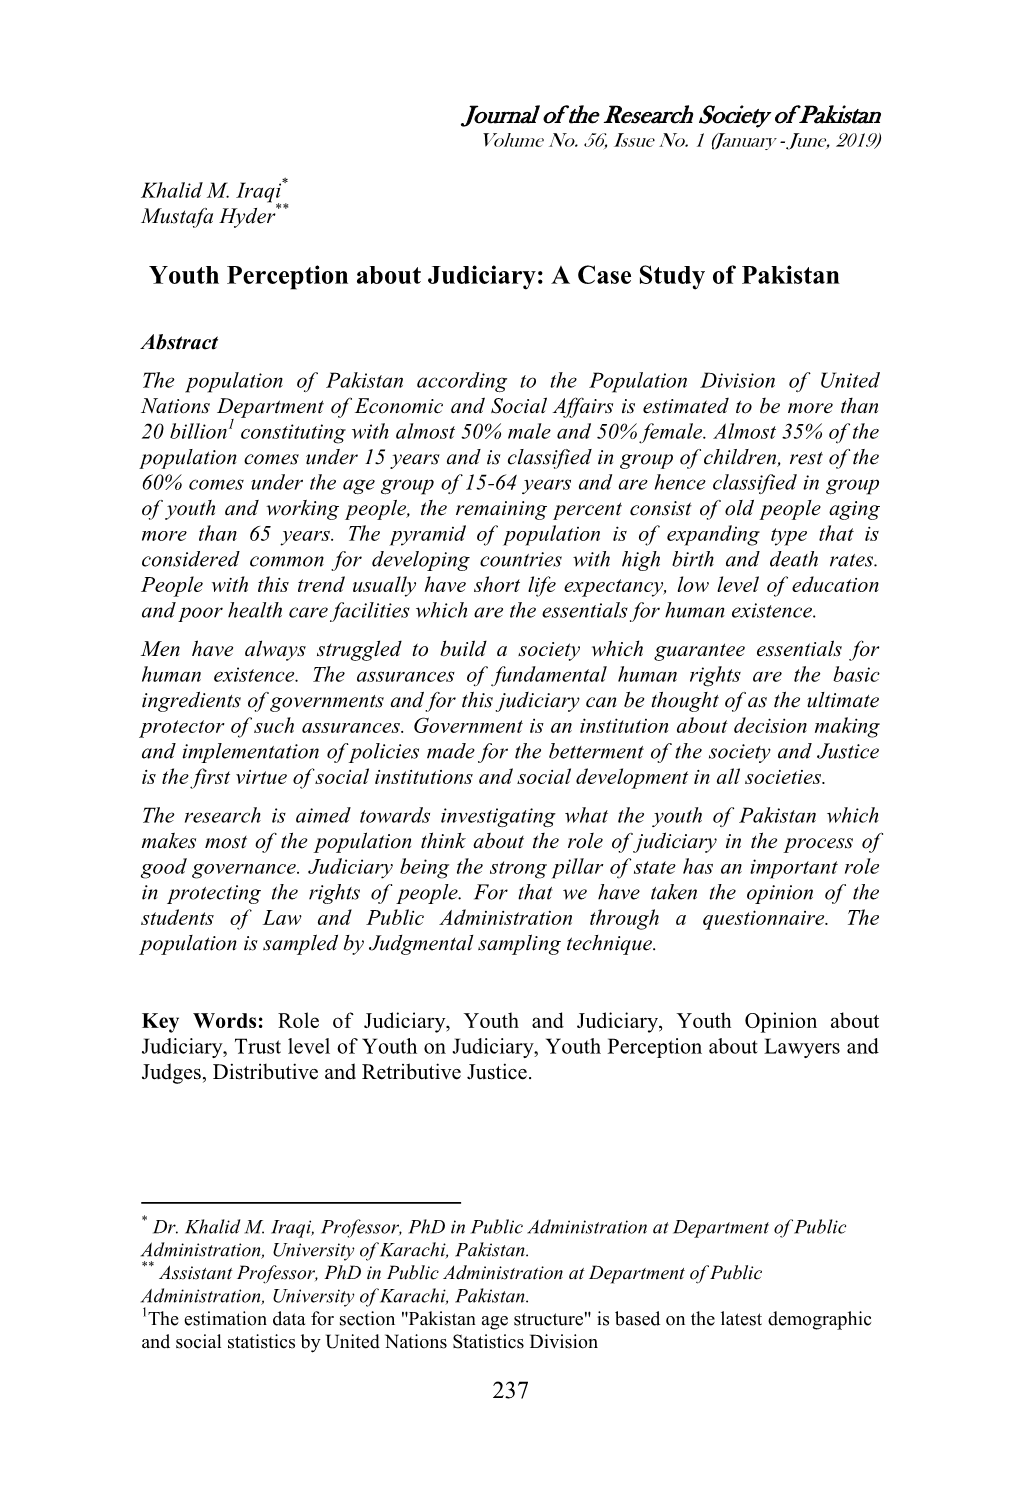 Youth Perception About Judiciary: a Case Study of Pakistan